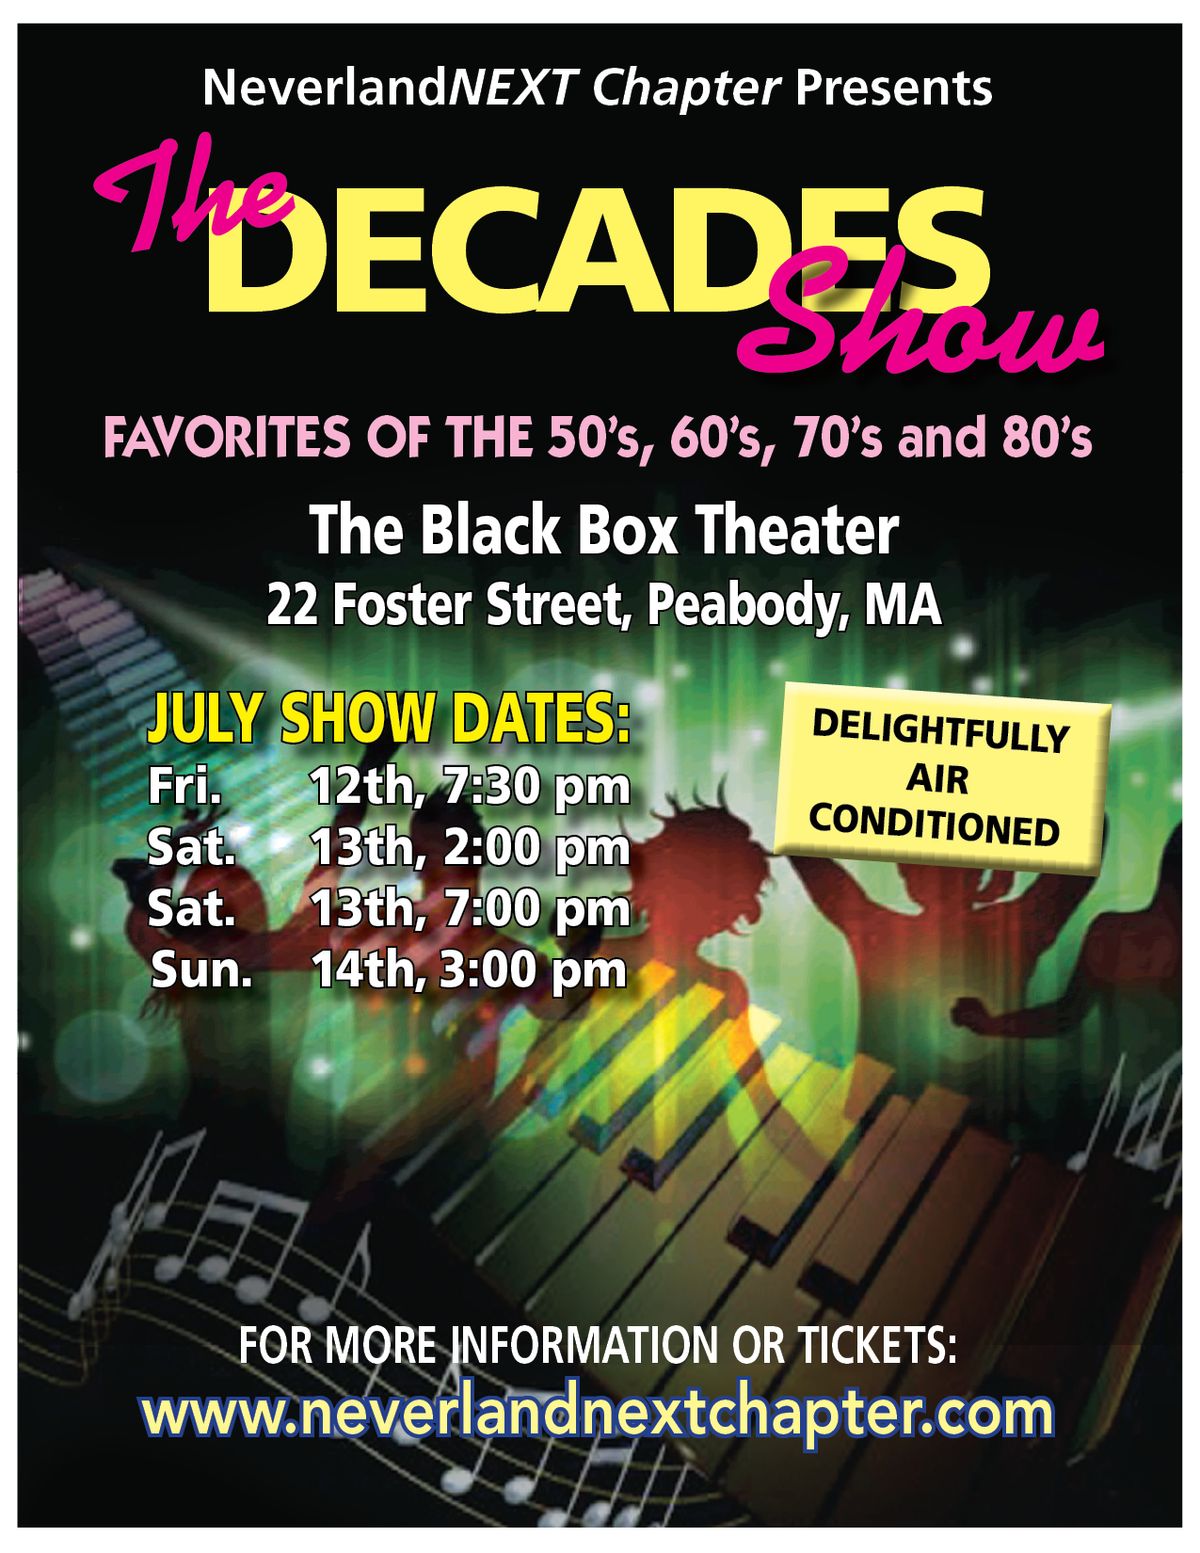 The Decades Show: July 12 - 14: Tickets on Sale Now